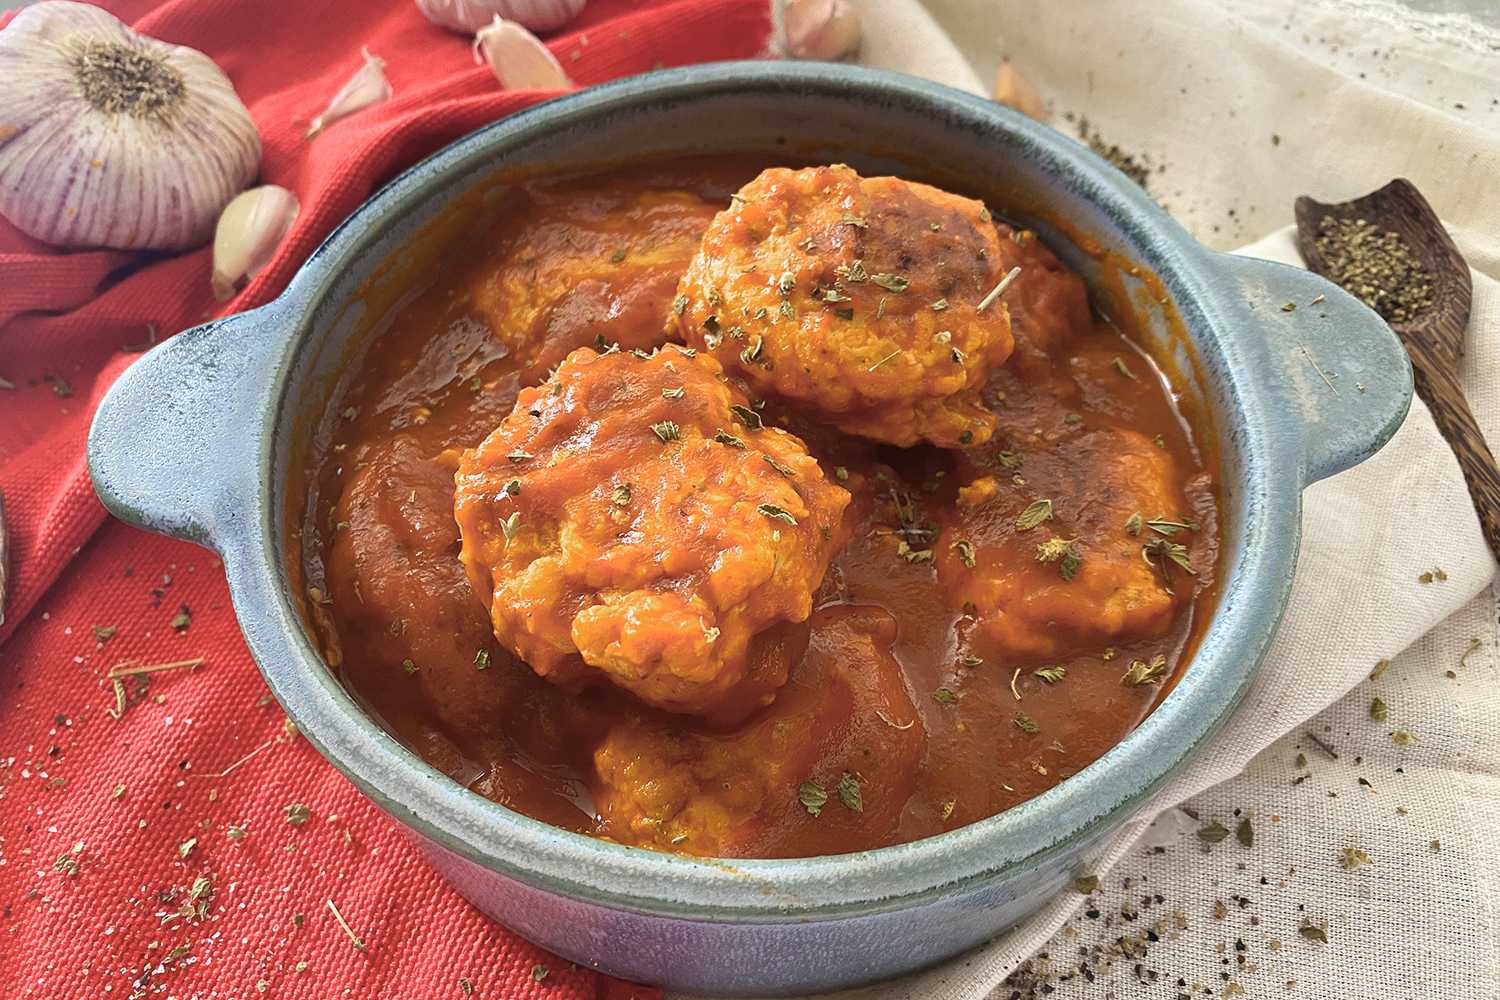 Chicken Meatballs in tomato sauce in a blue bowl with oregano on top